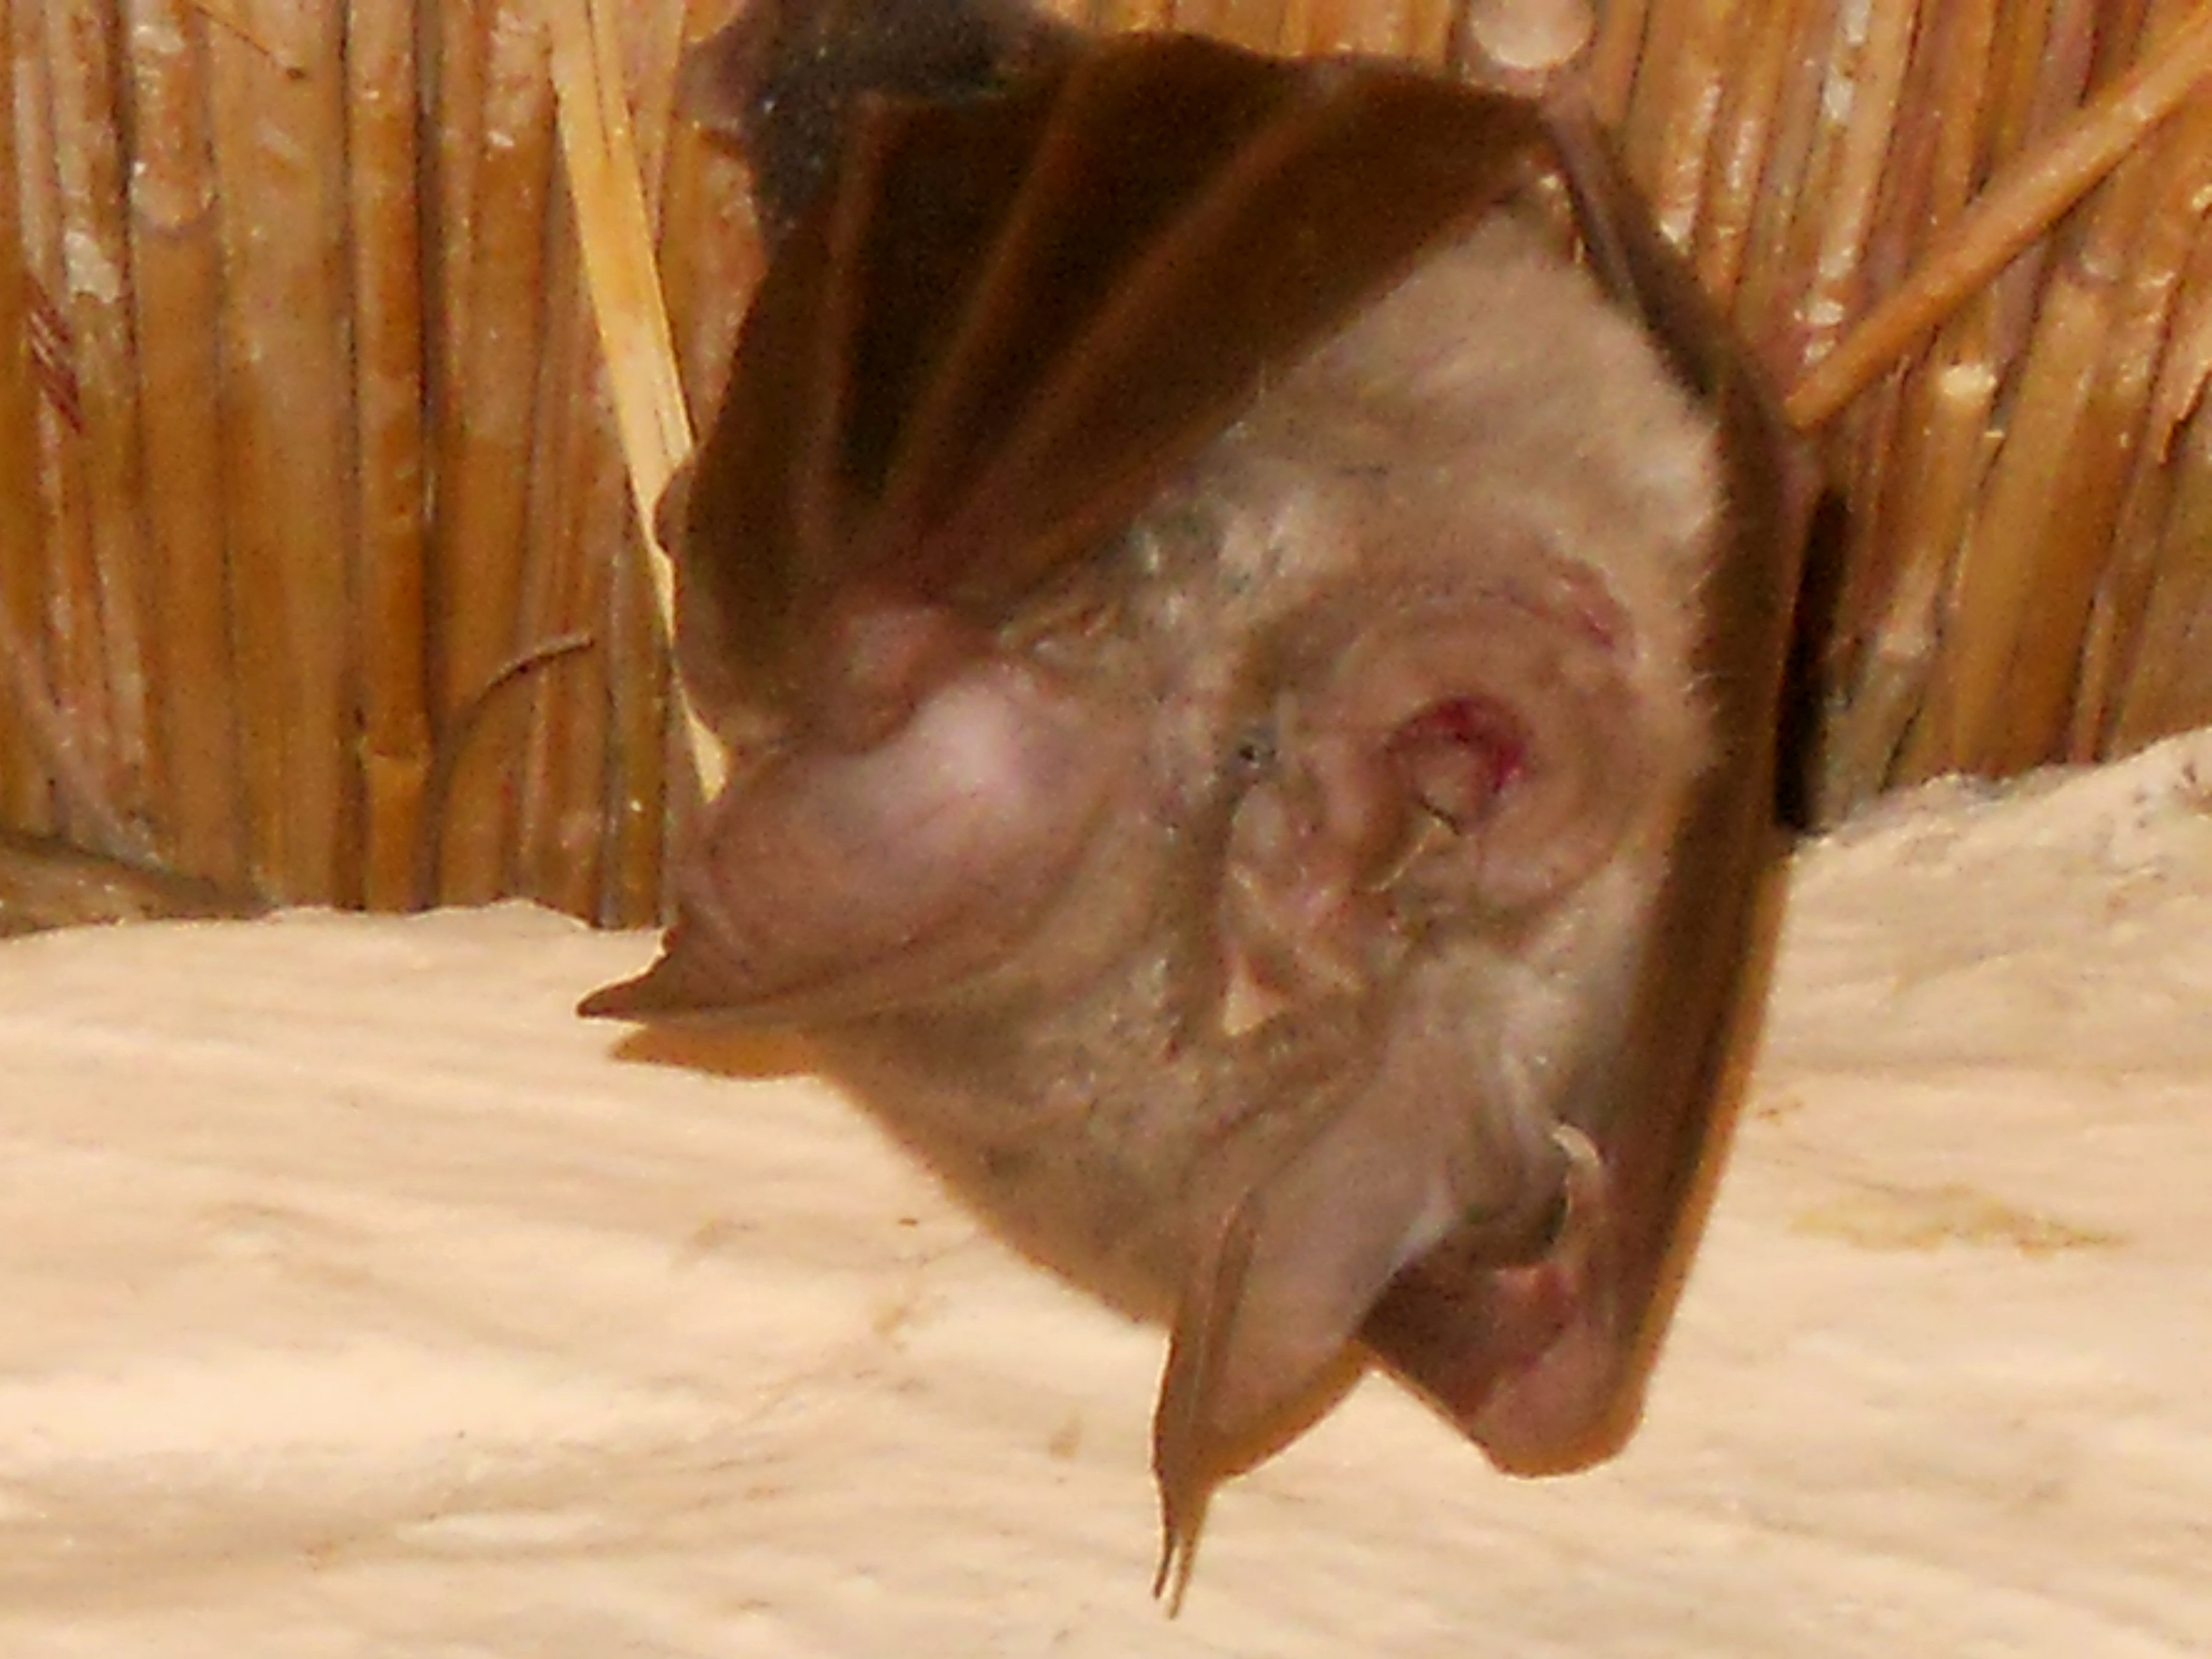 Click picture to see more Common Slit-faced Bats.